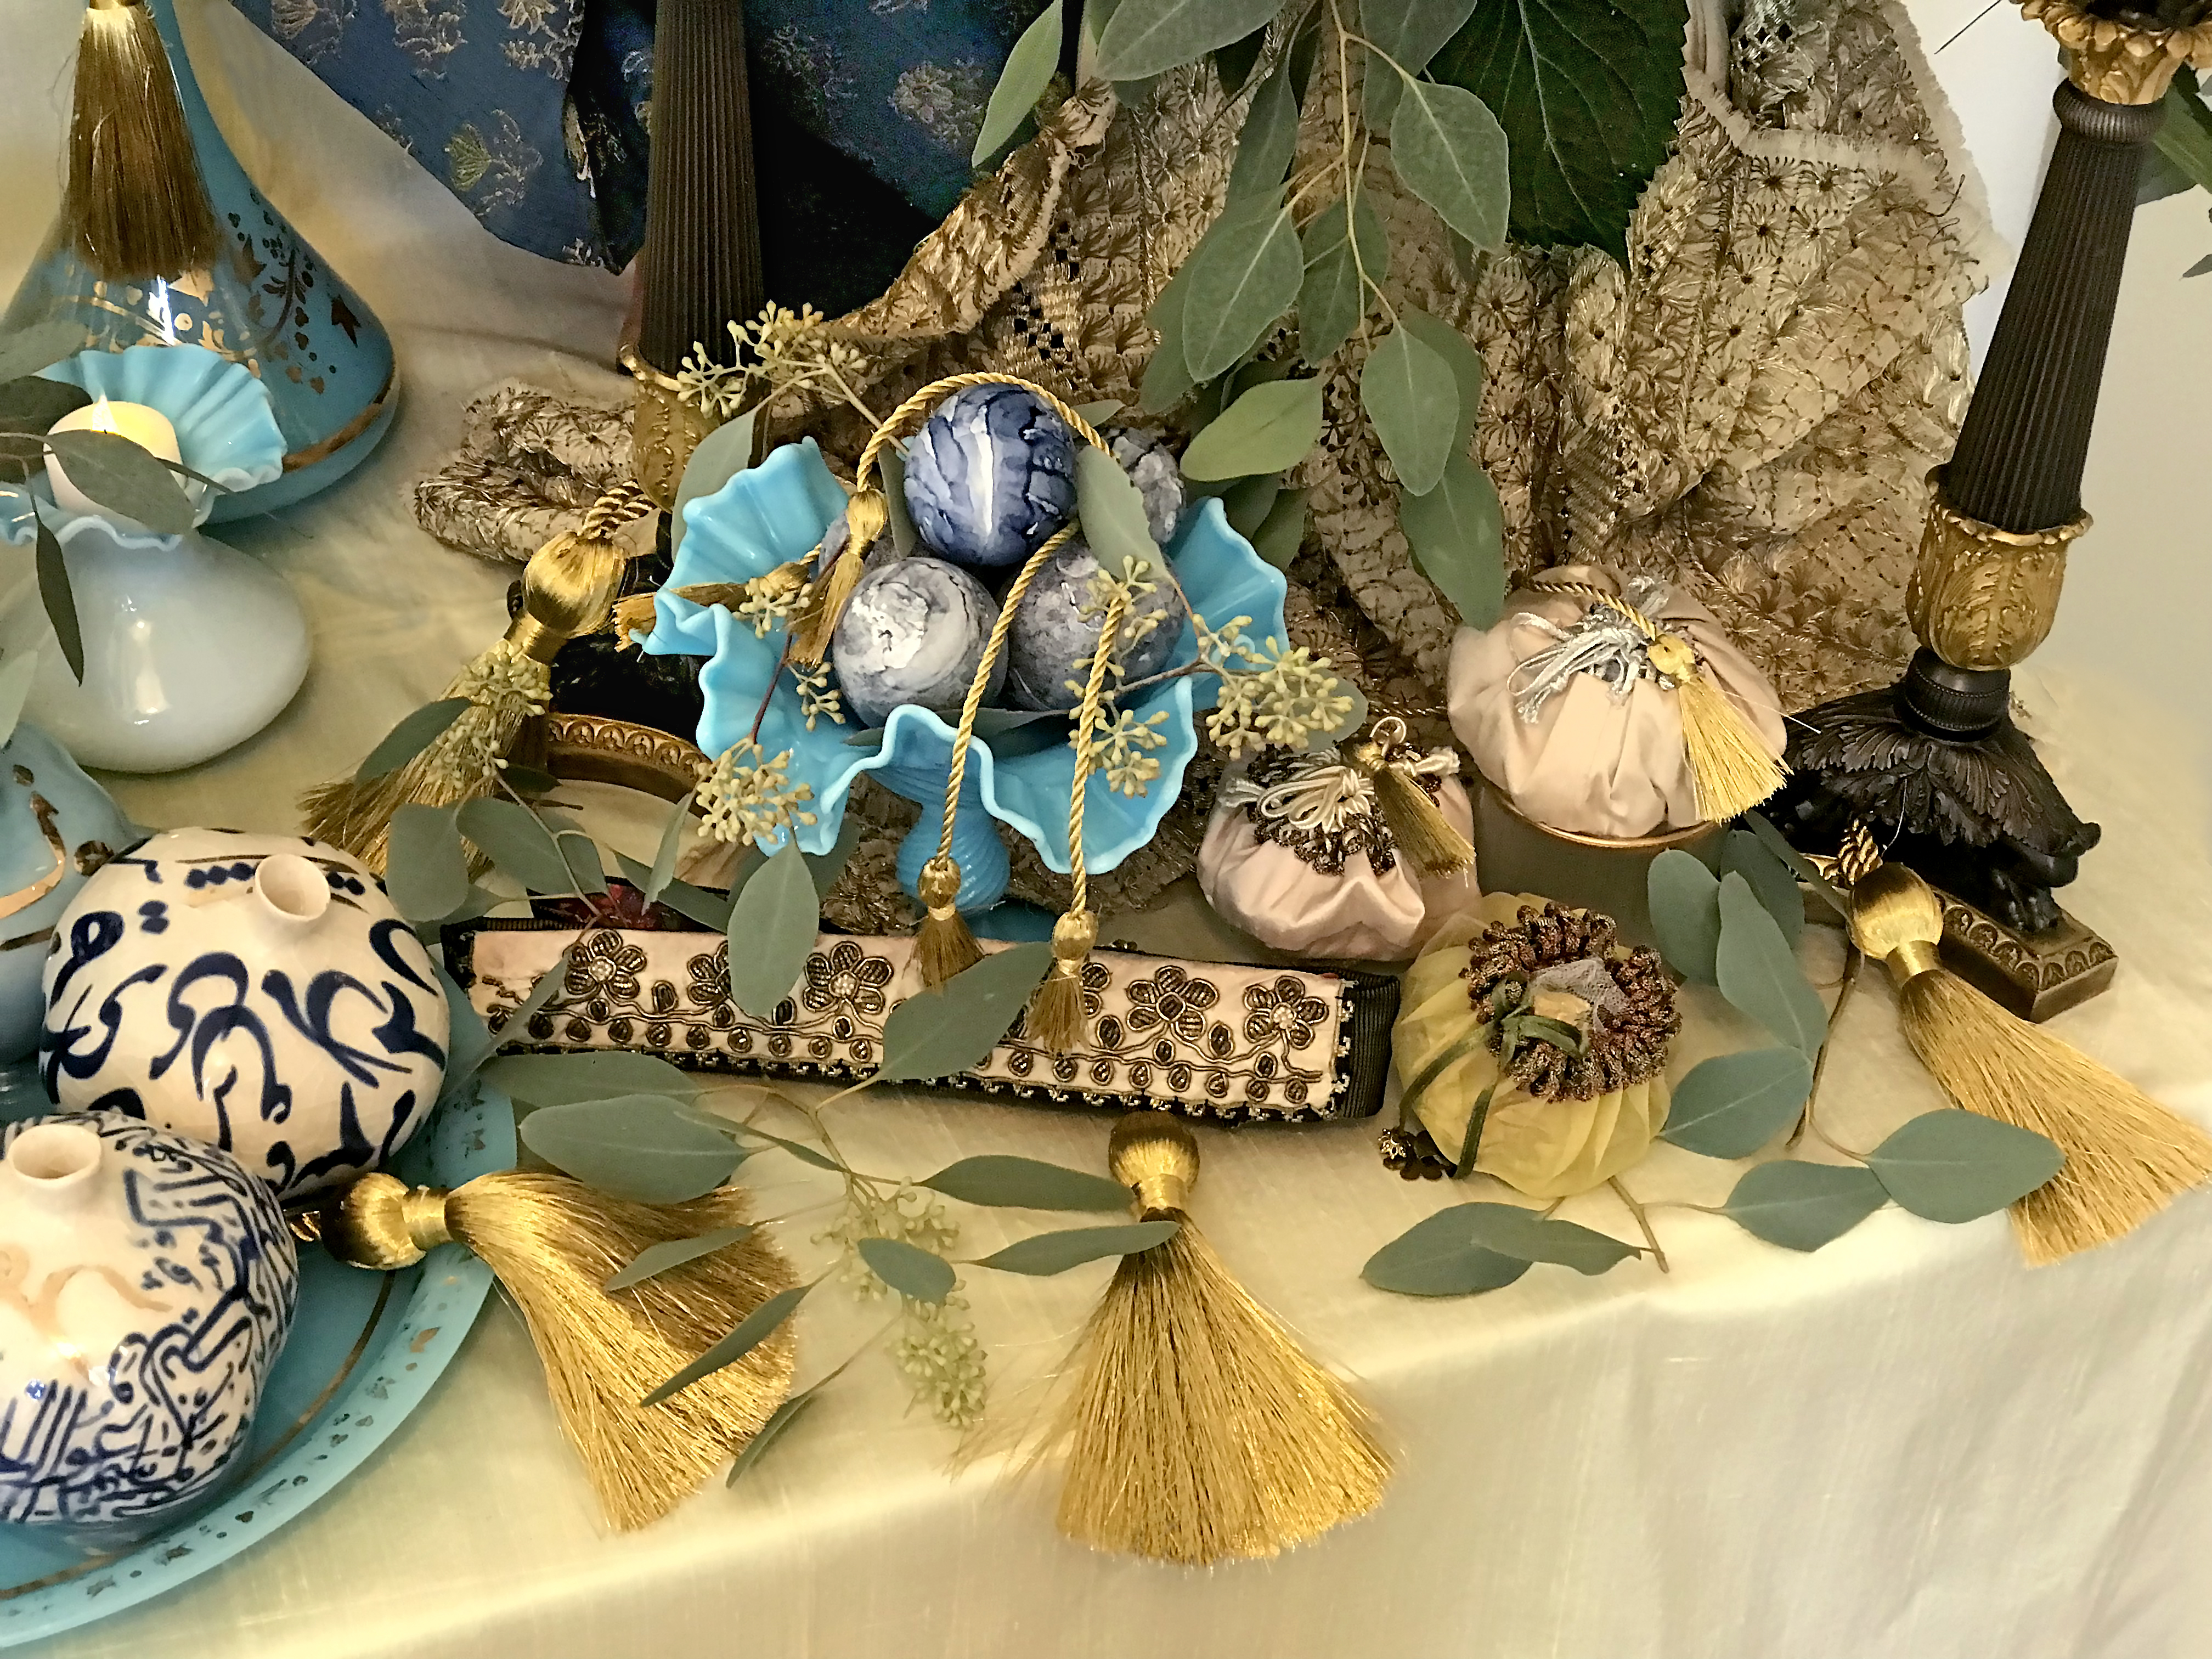 Blue painted eggs, bonbonnieres on Indian ivory and gold textile